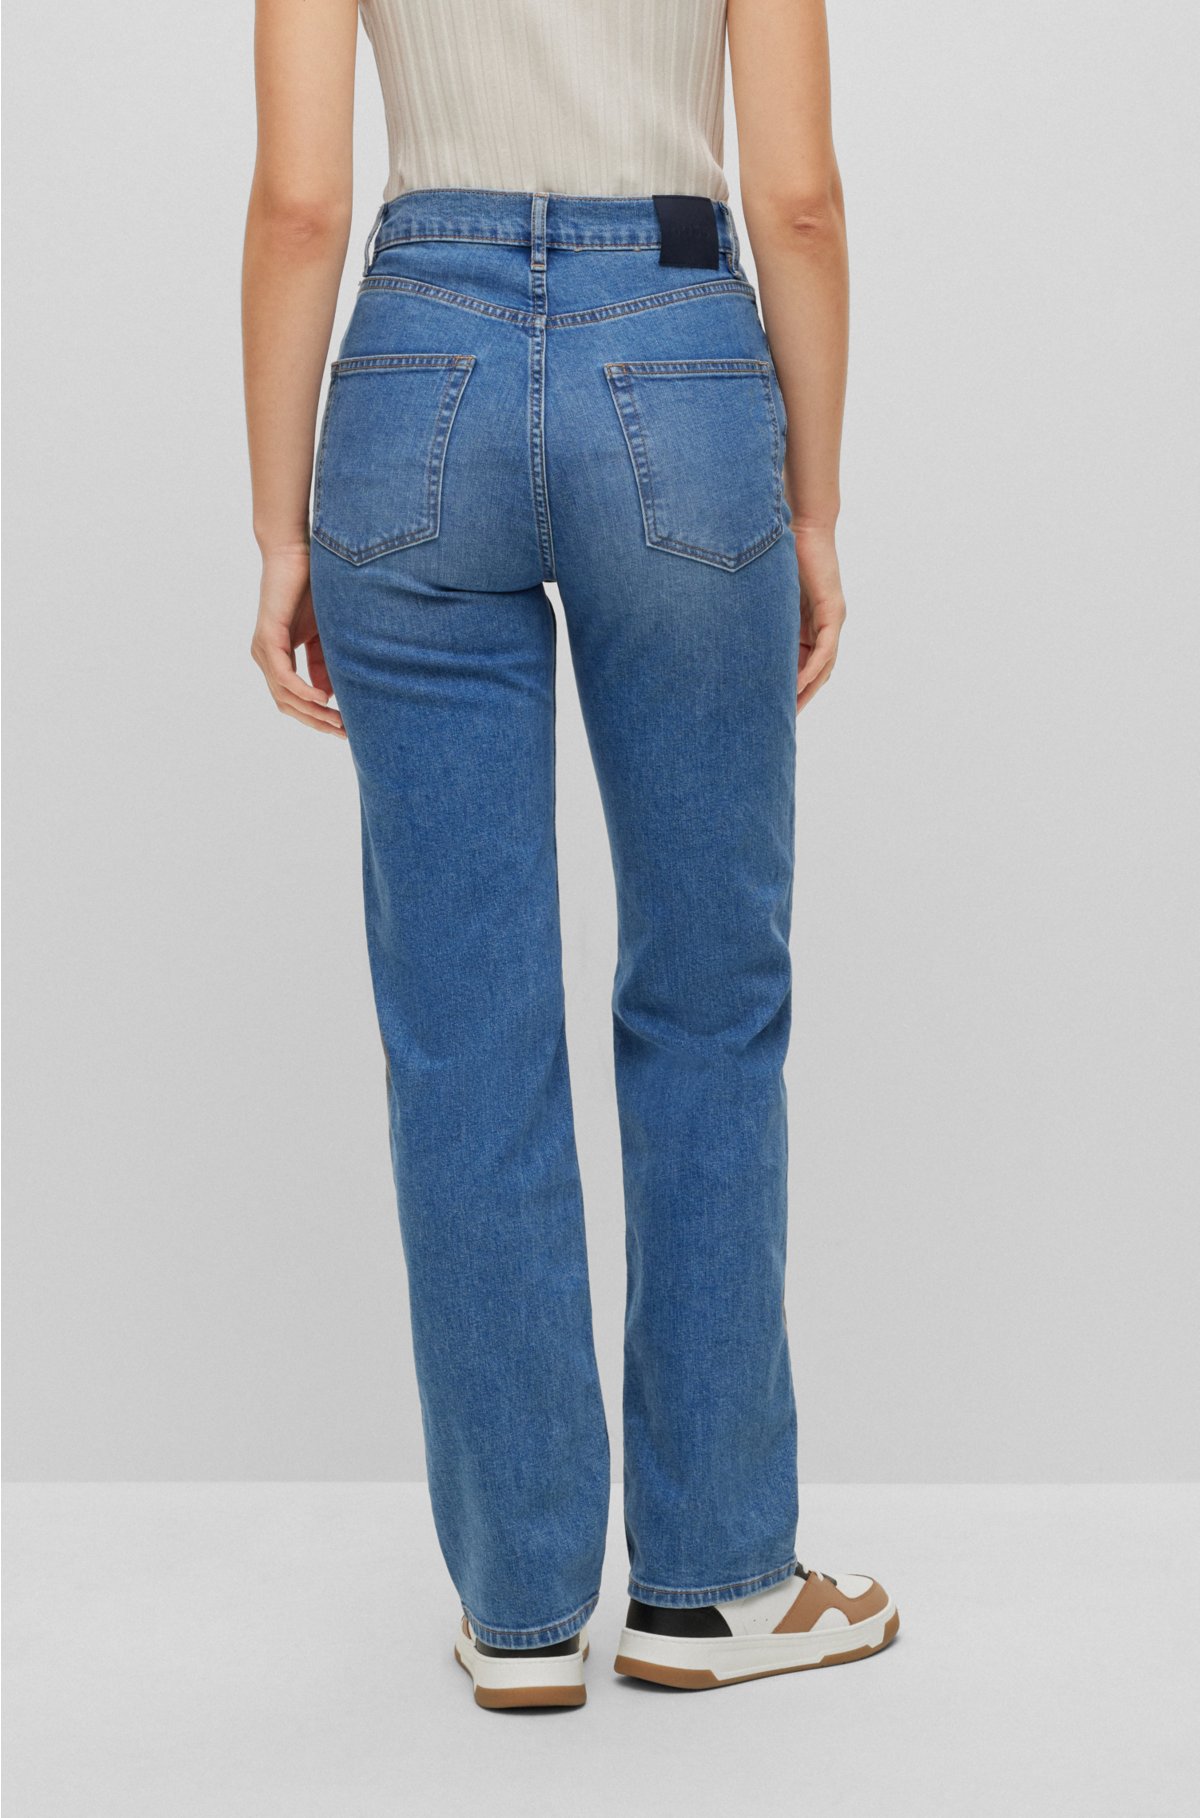 Jeans Straight By Escada Size: 8 – Clothes Mentor Rochester Hills